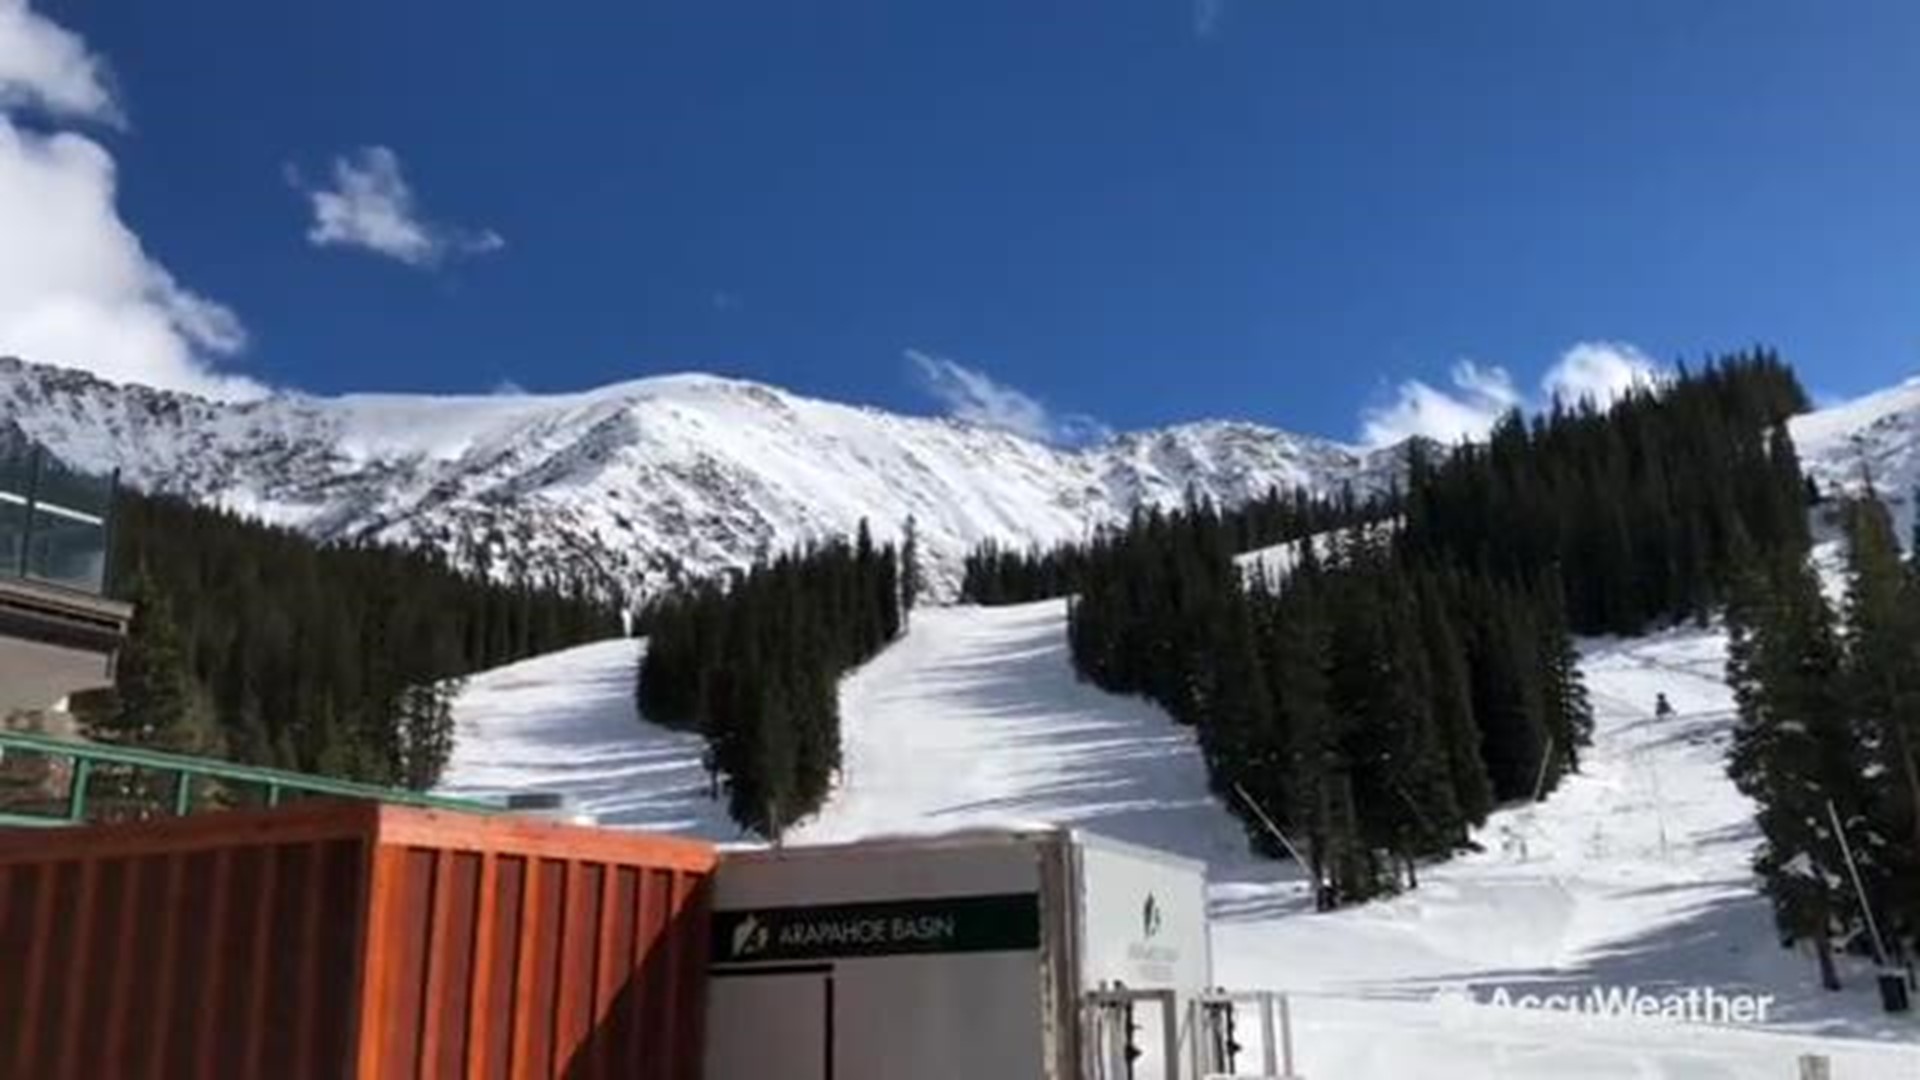 Reed Timmer reports from Arapahoe Basin Ski Area in Keystone, Colorado on opening day. Skiers are ready to take on the slopes.